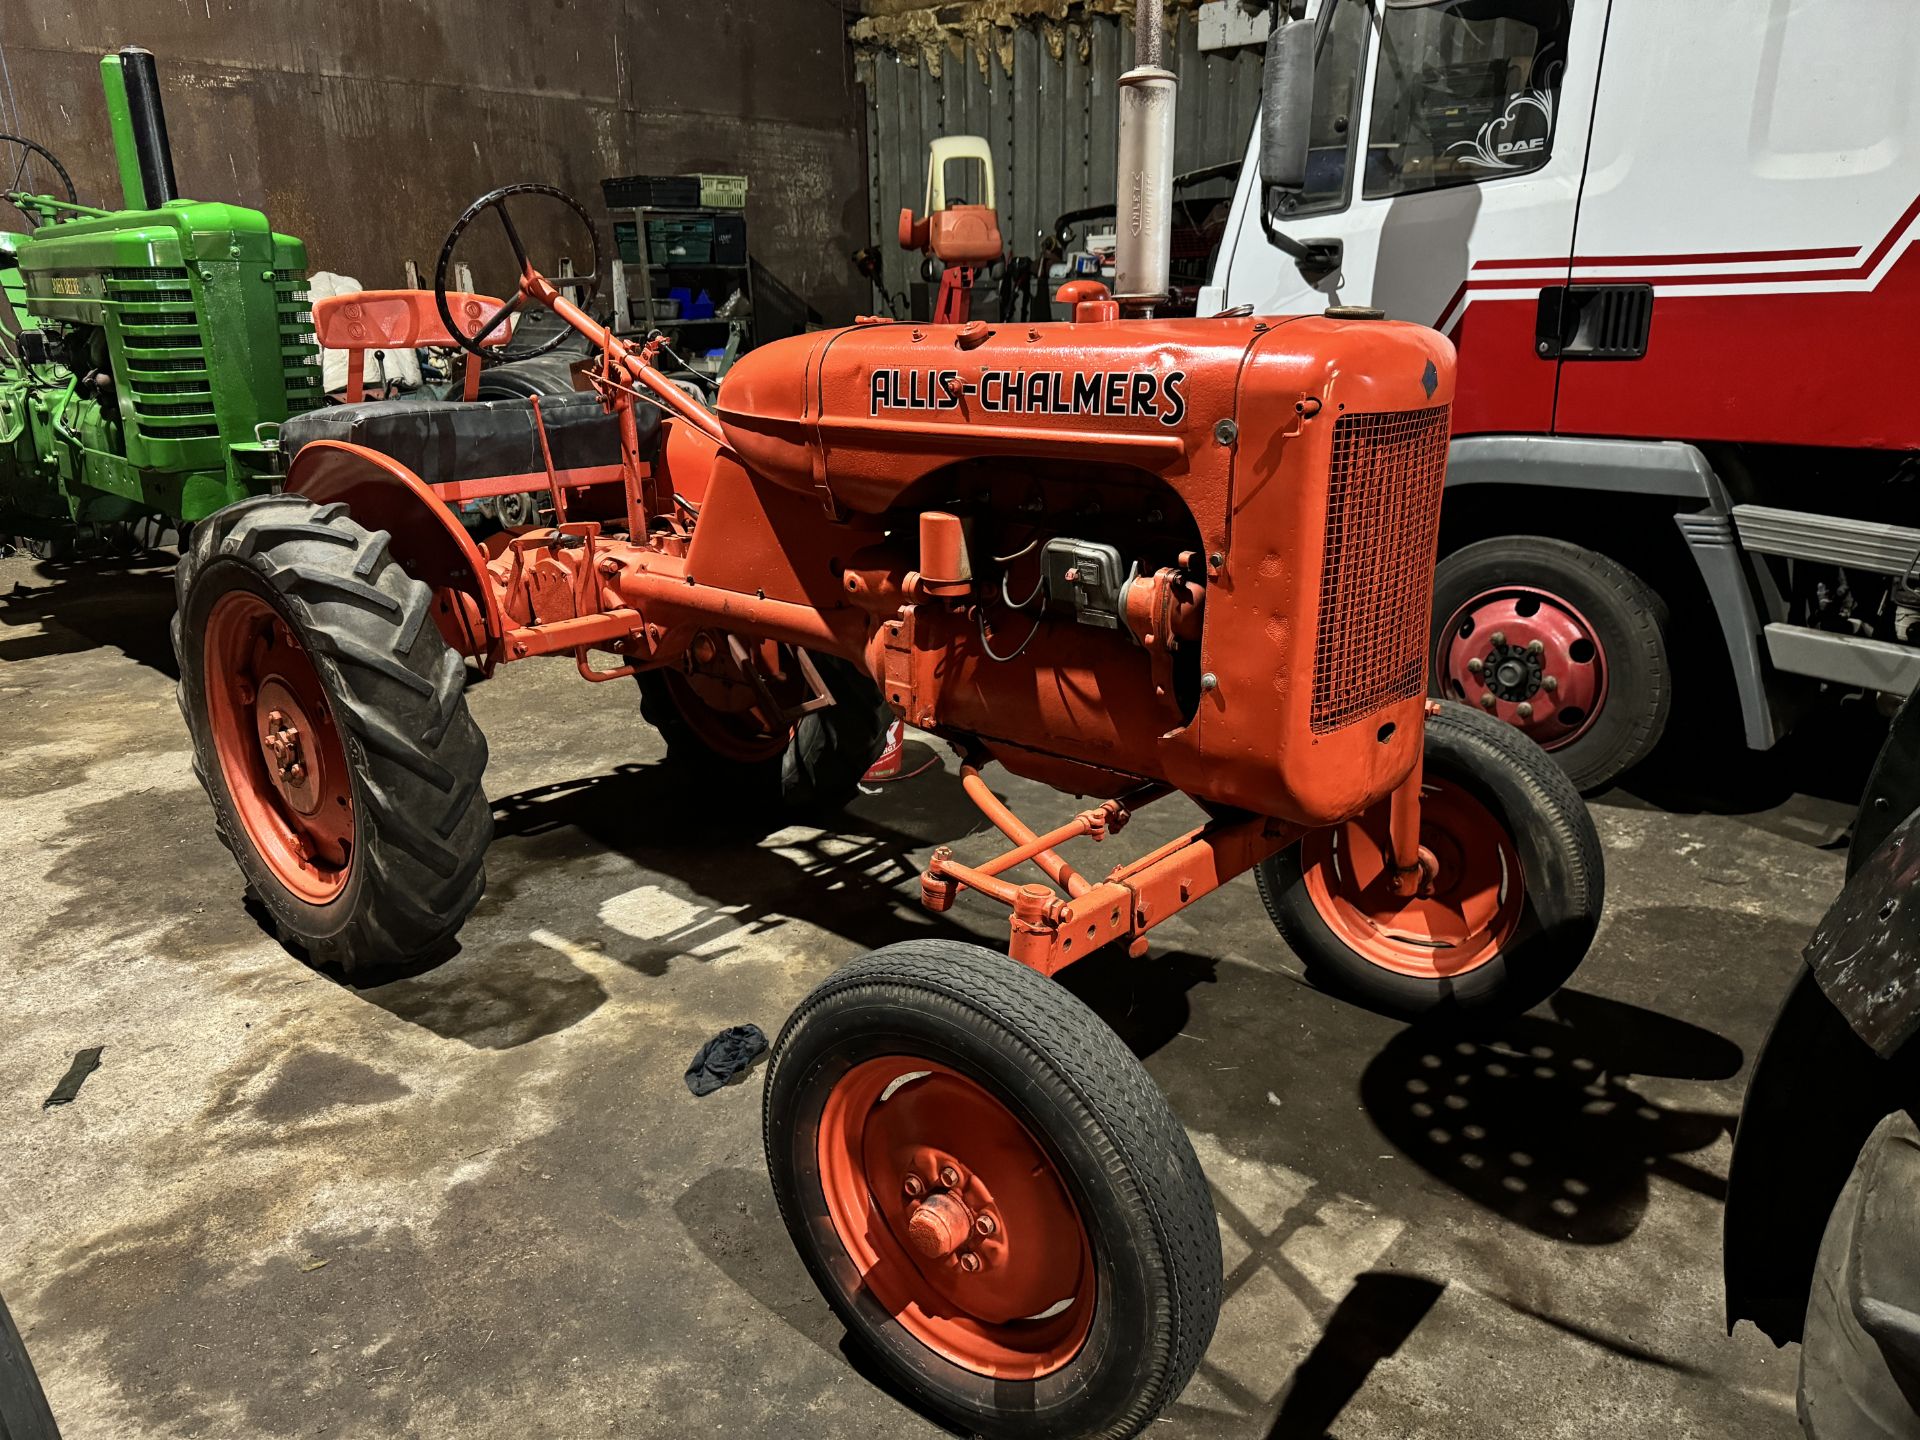 1948 Allis Chalmers B petrol/parafin tractor - Image 2 of 2